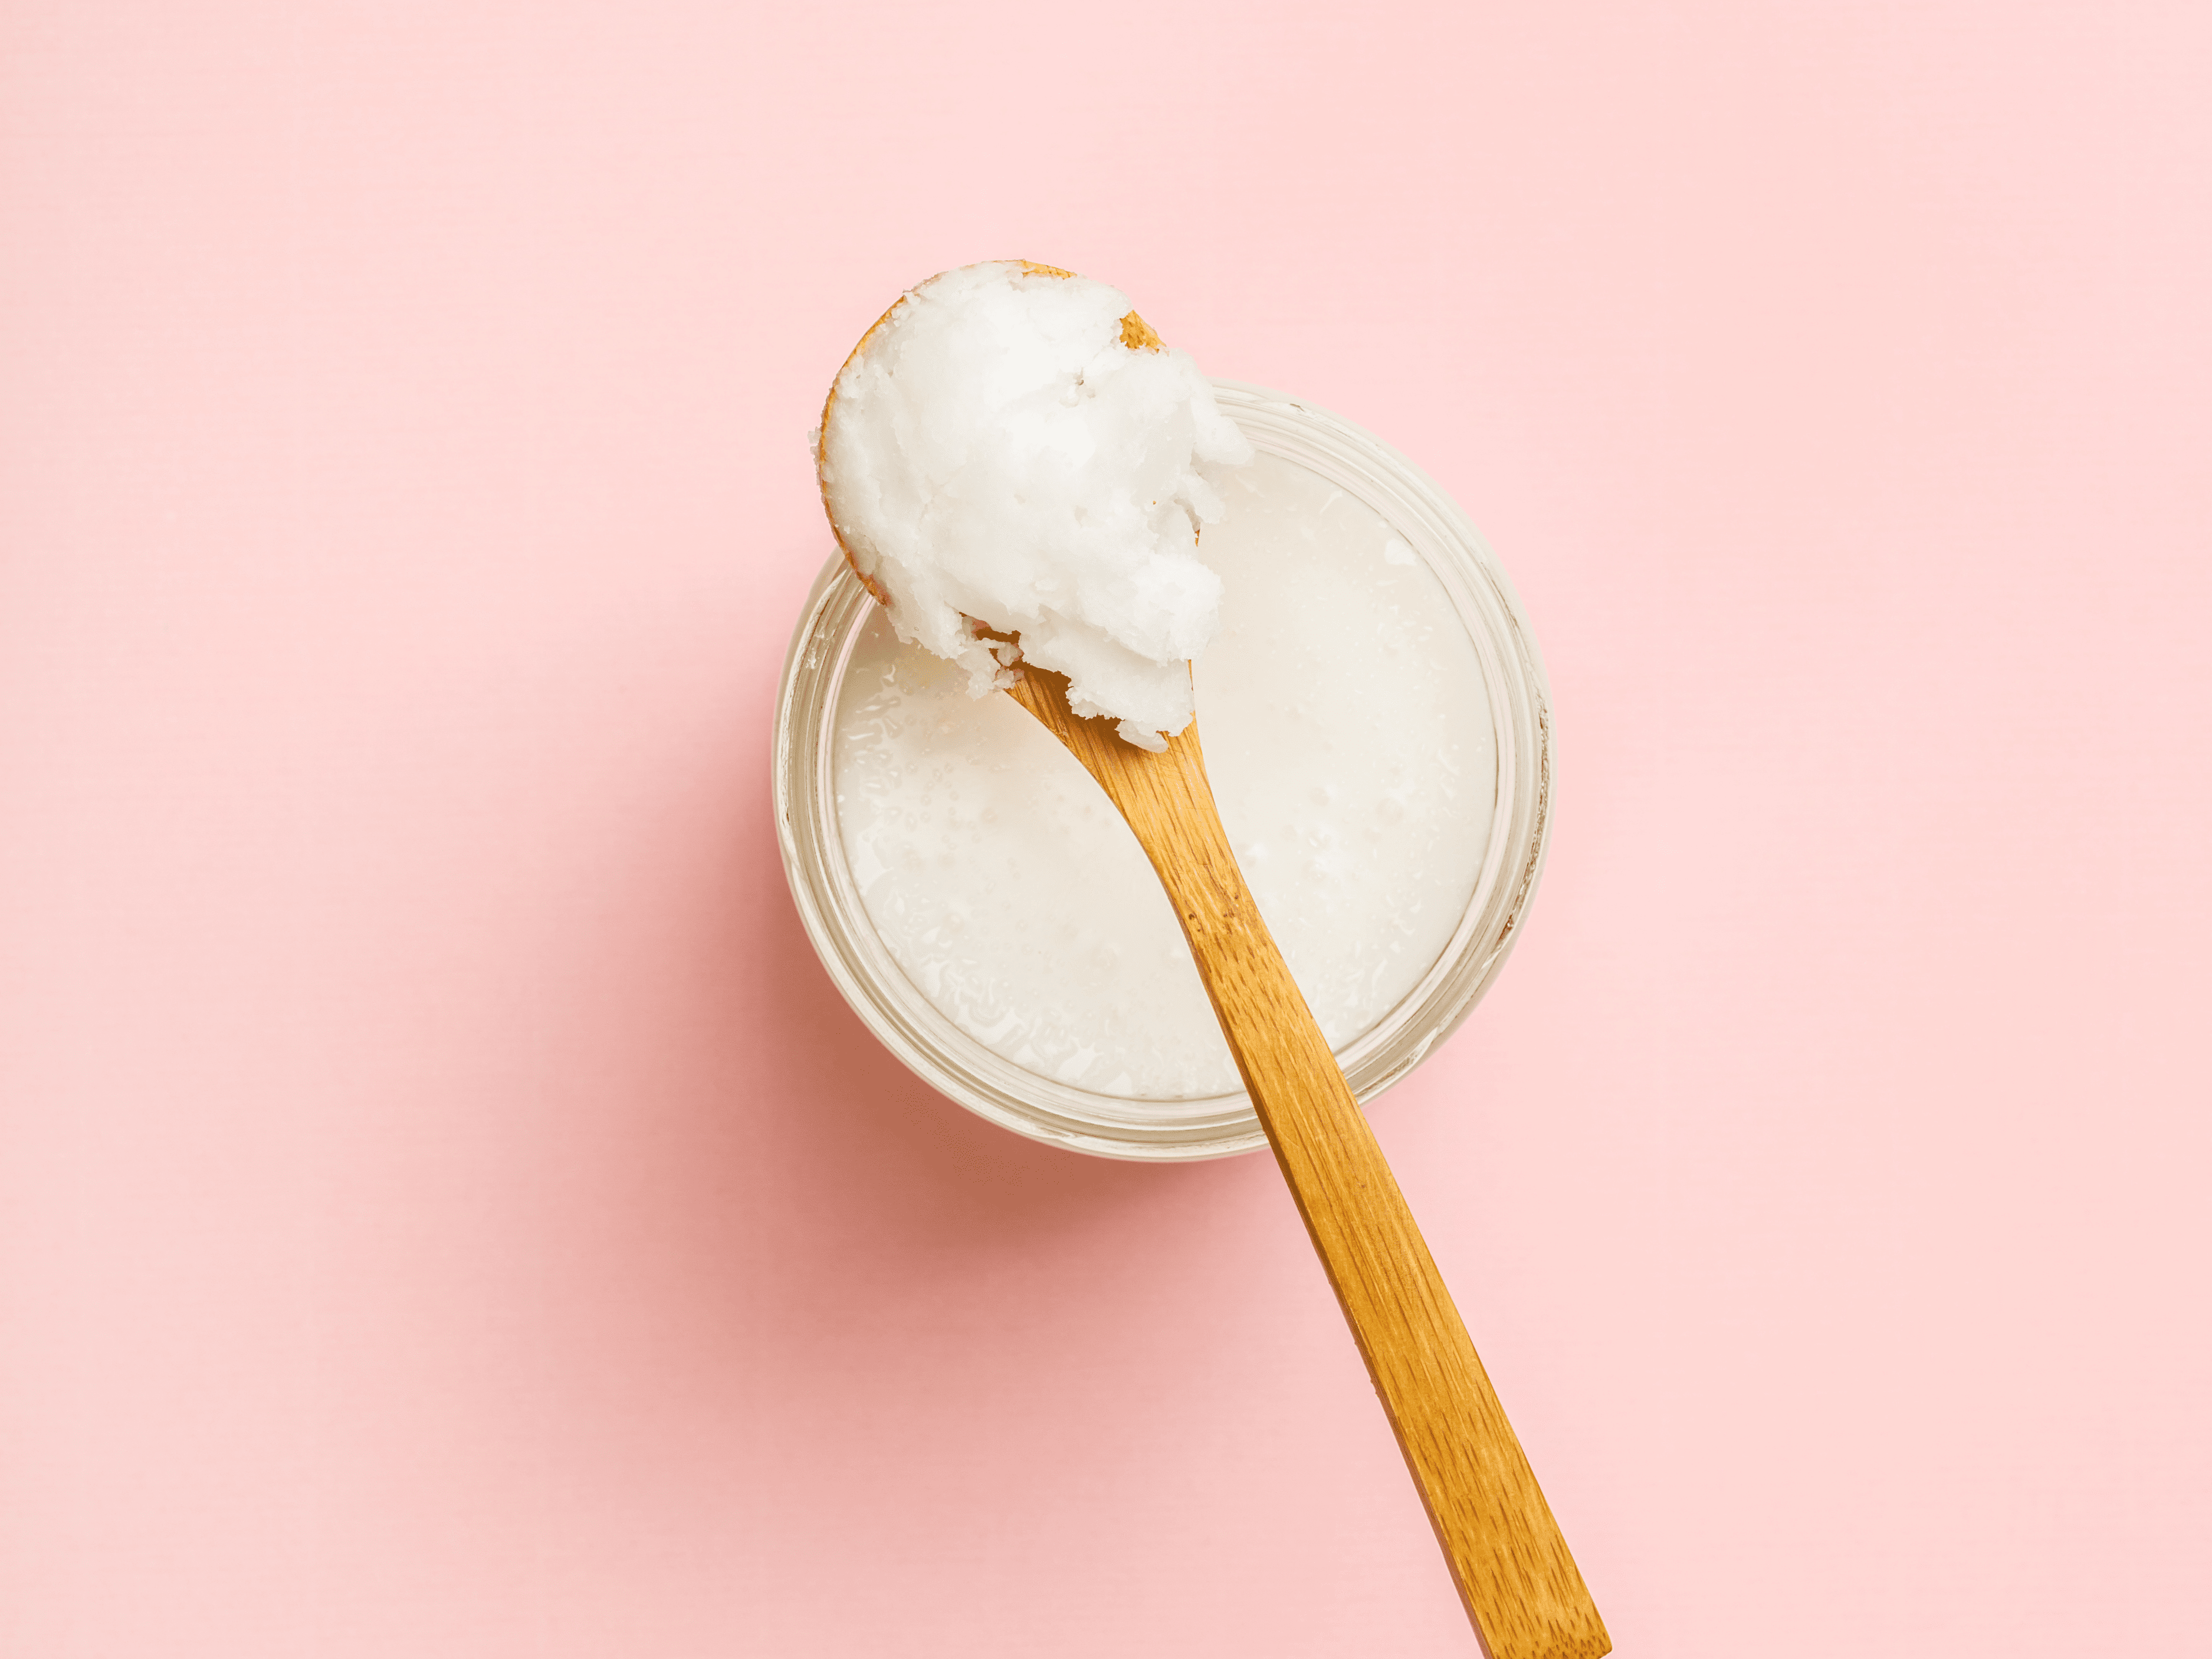 Are Oil Pulling Health Benefits Even For Real? Let's Talk About It.